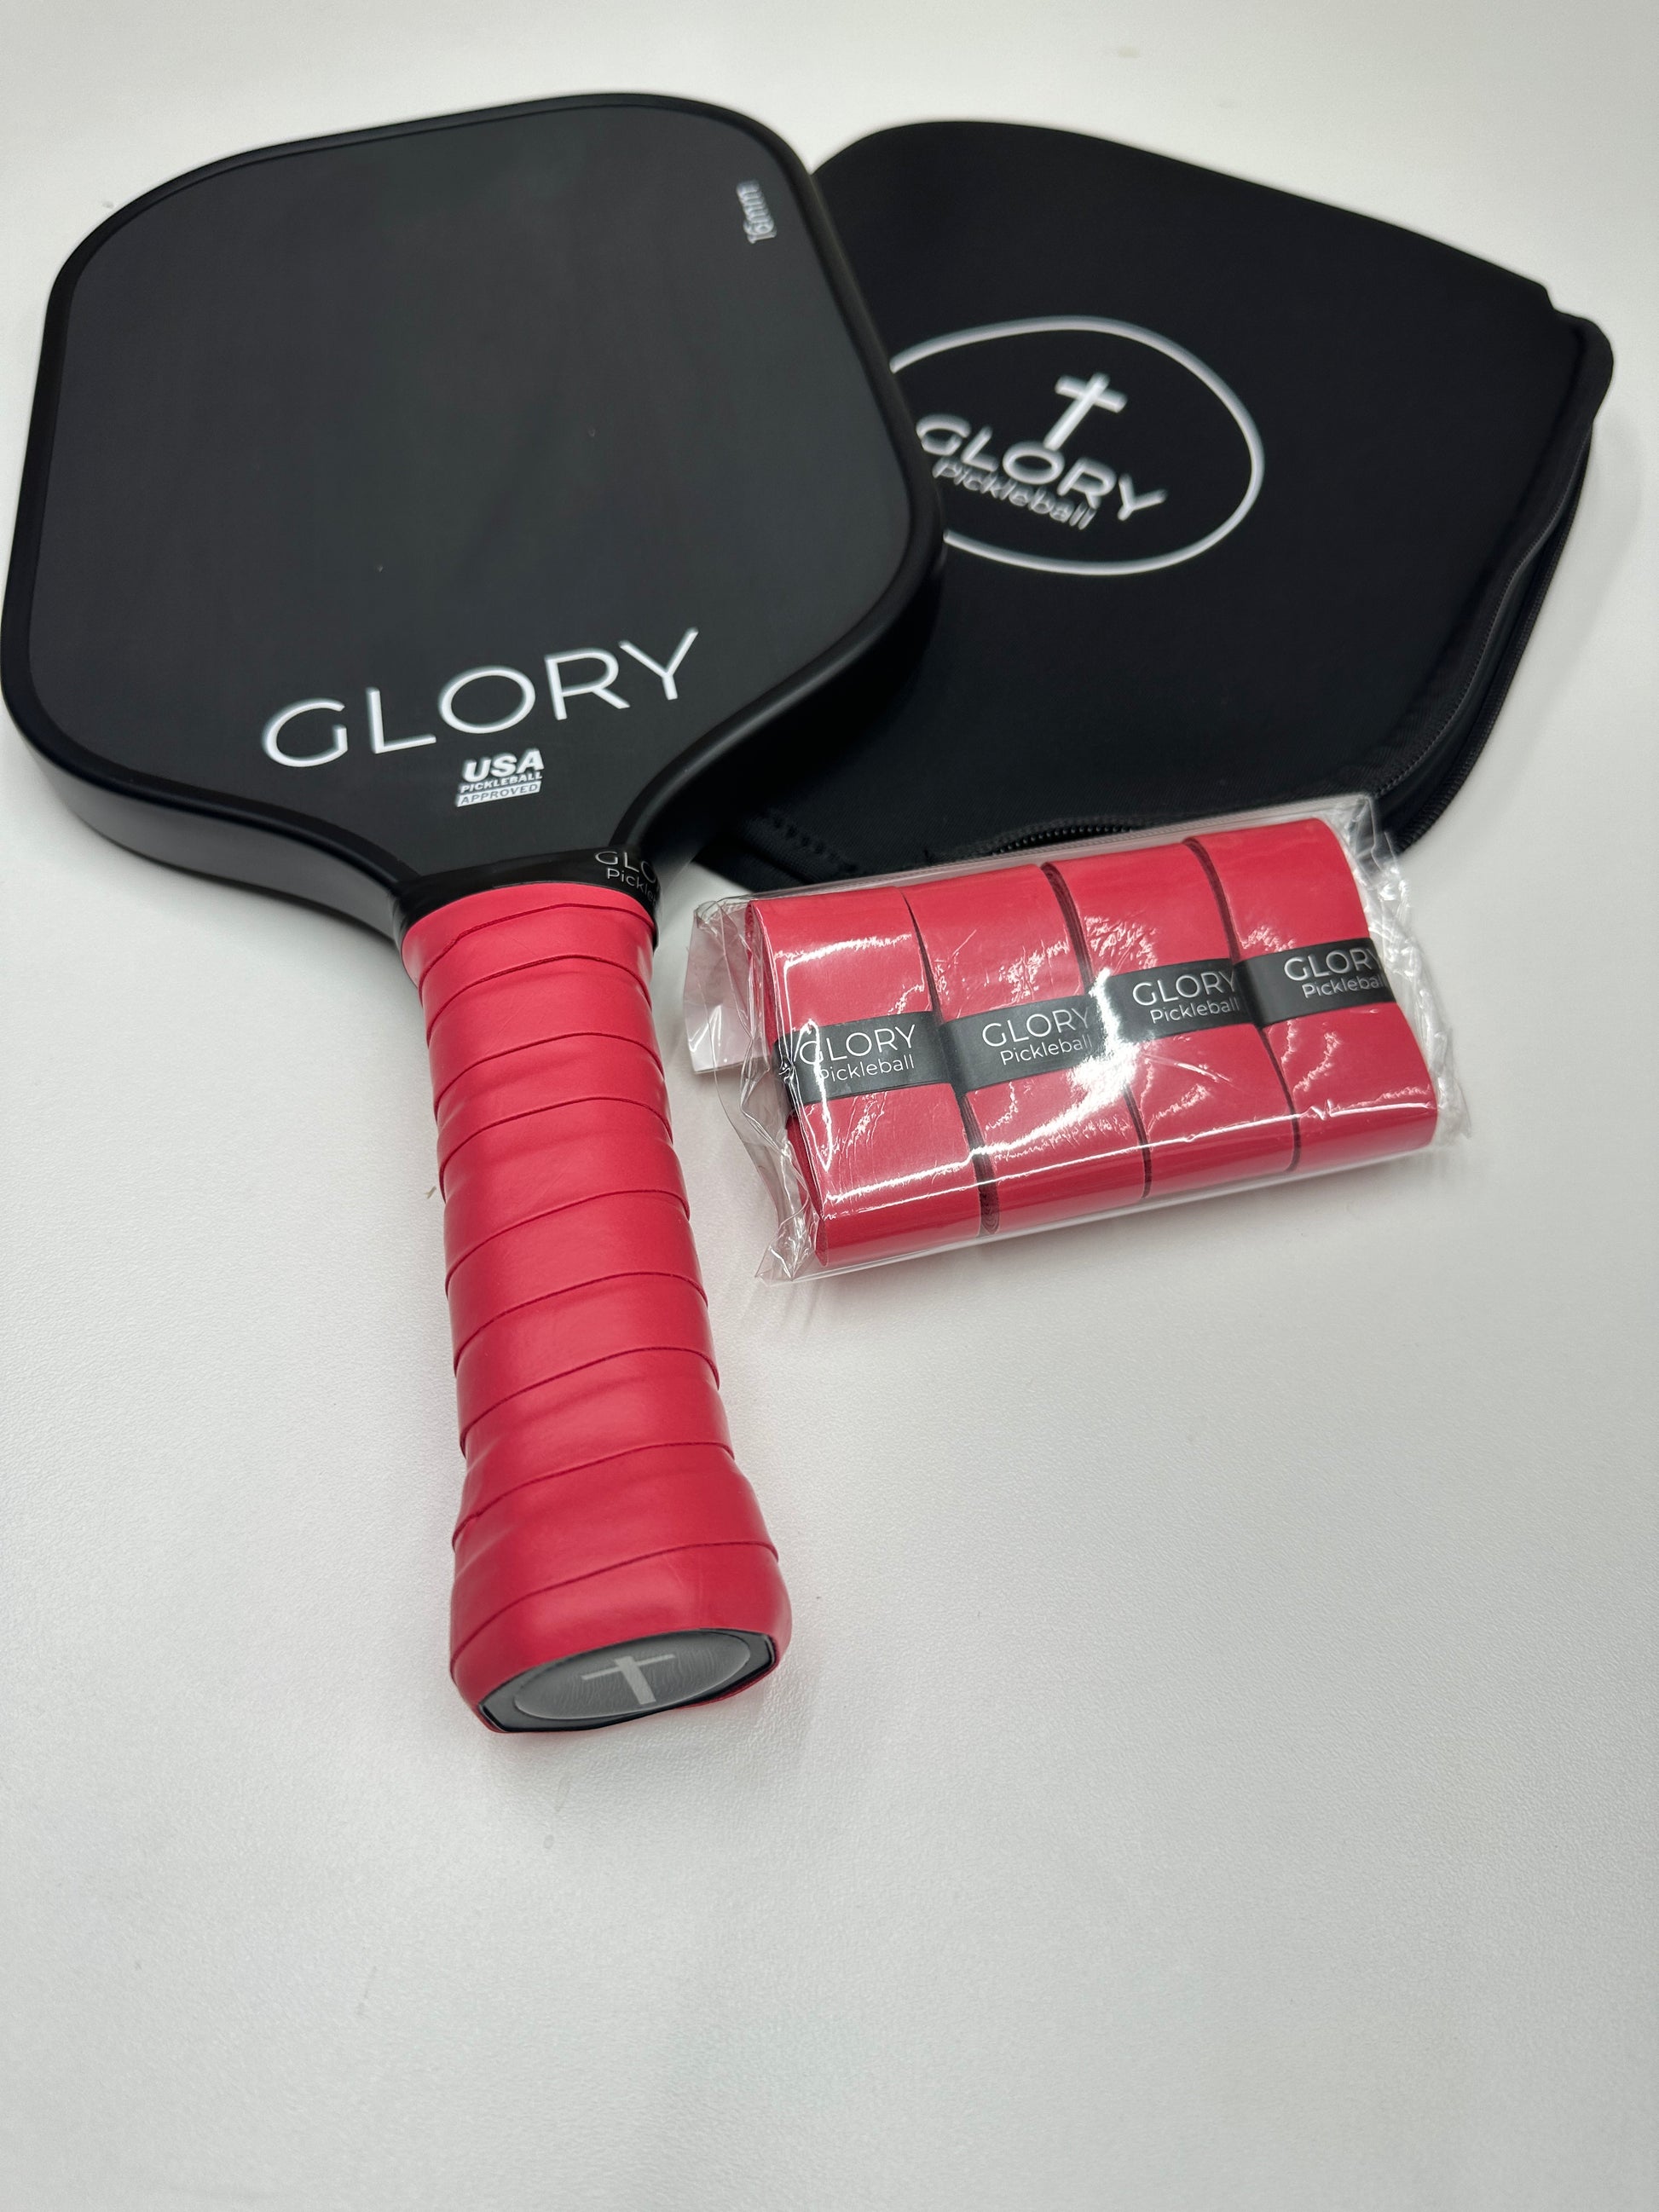 How To Grip A Pickleball Paddle - 3 Different Ways